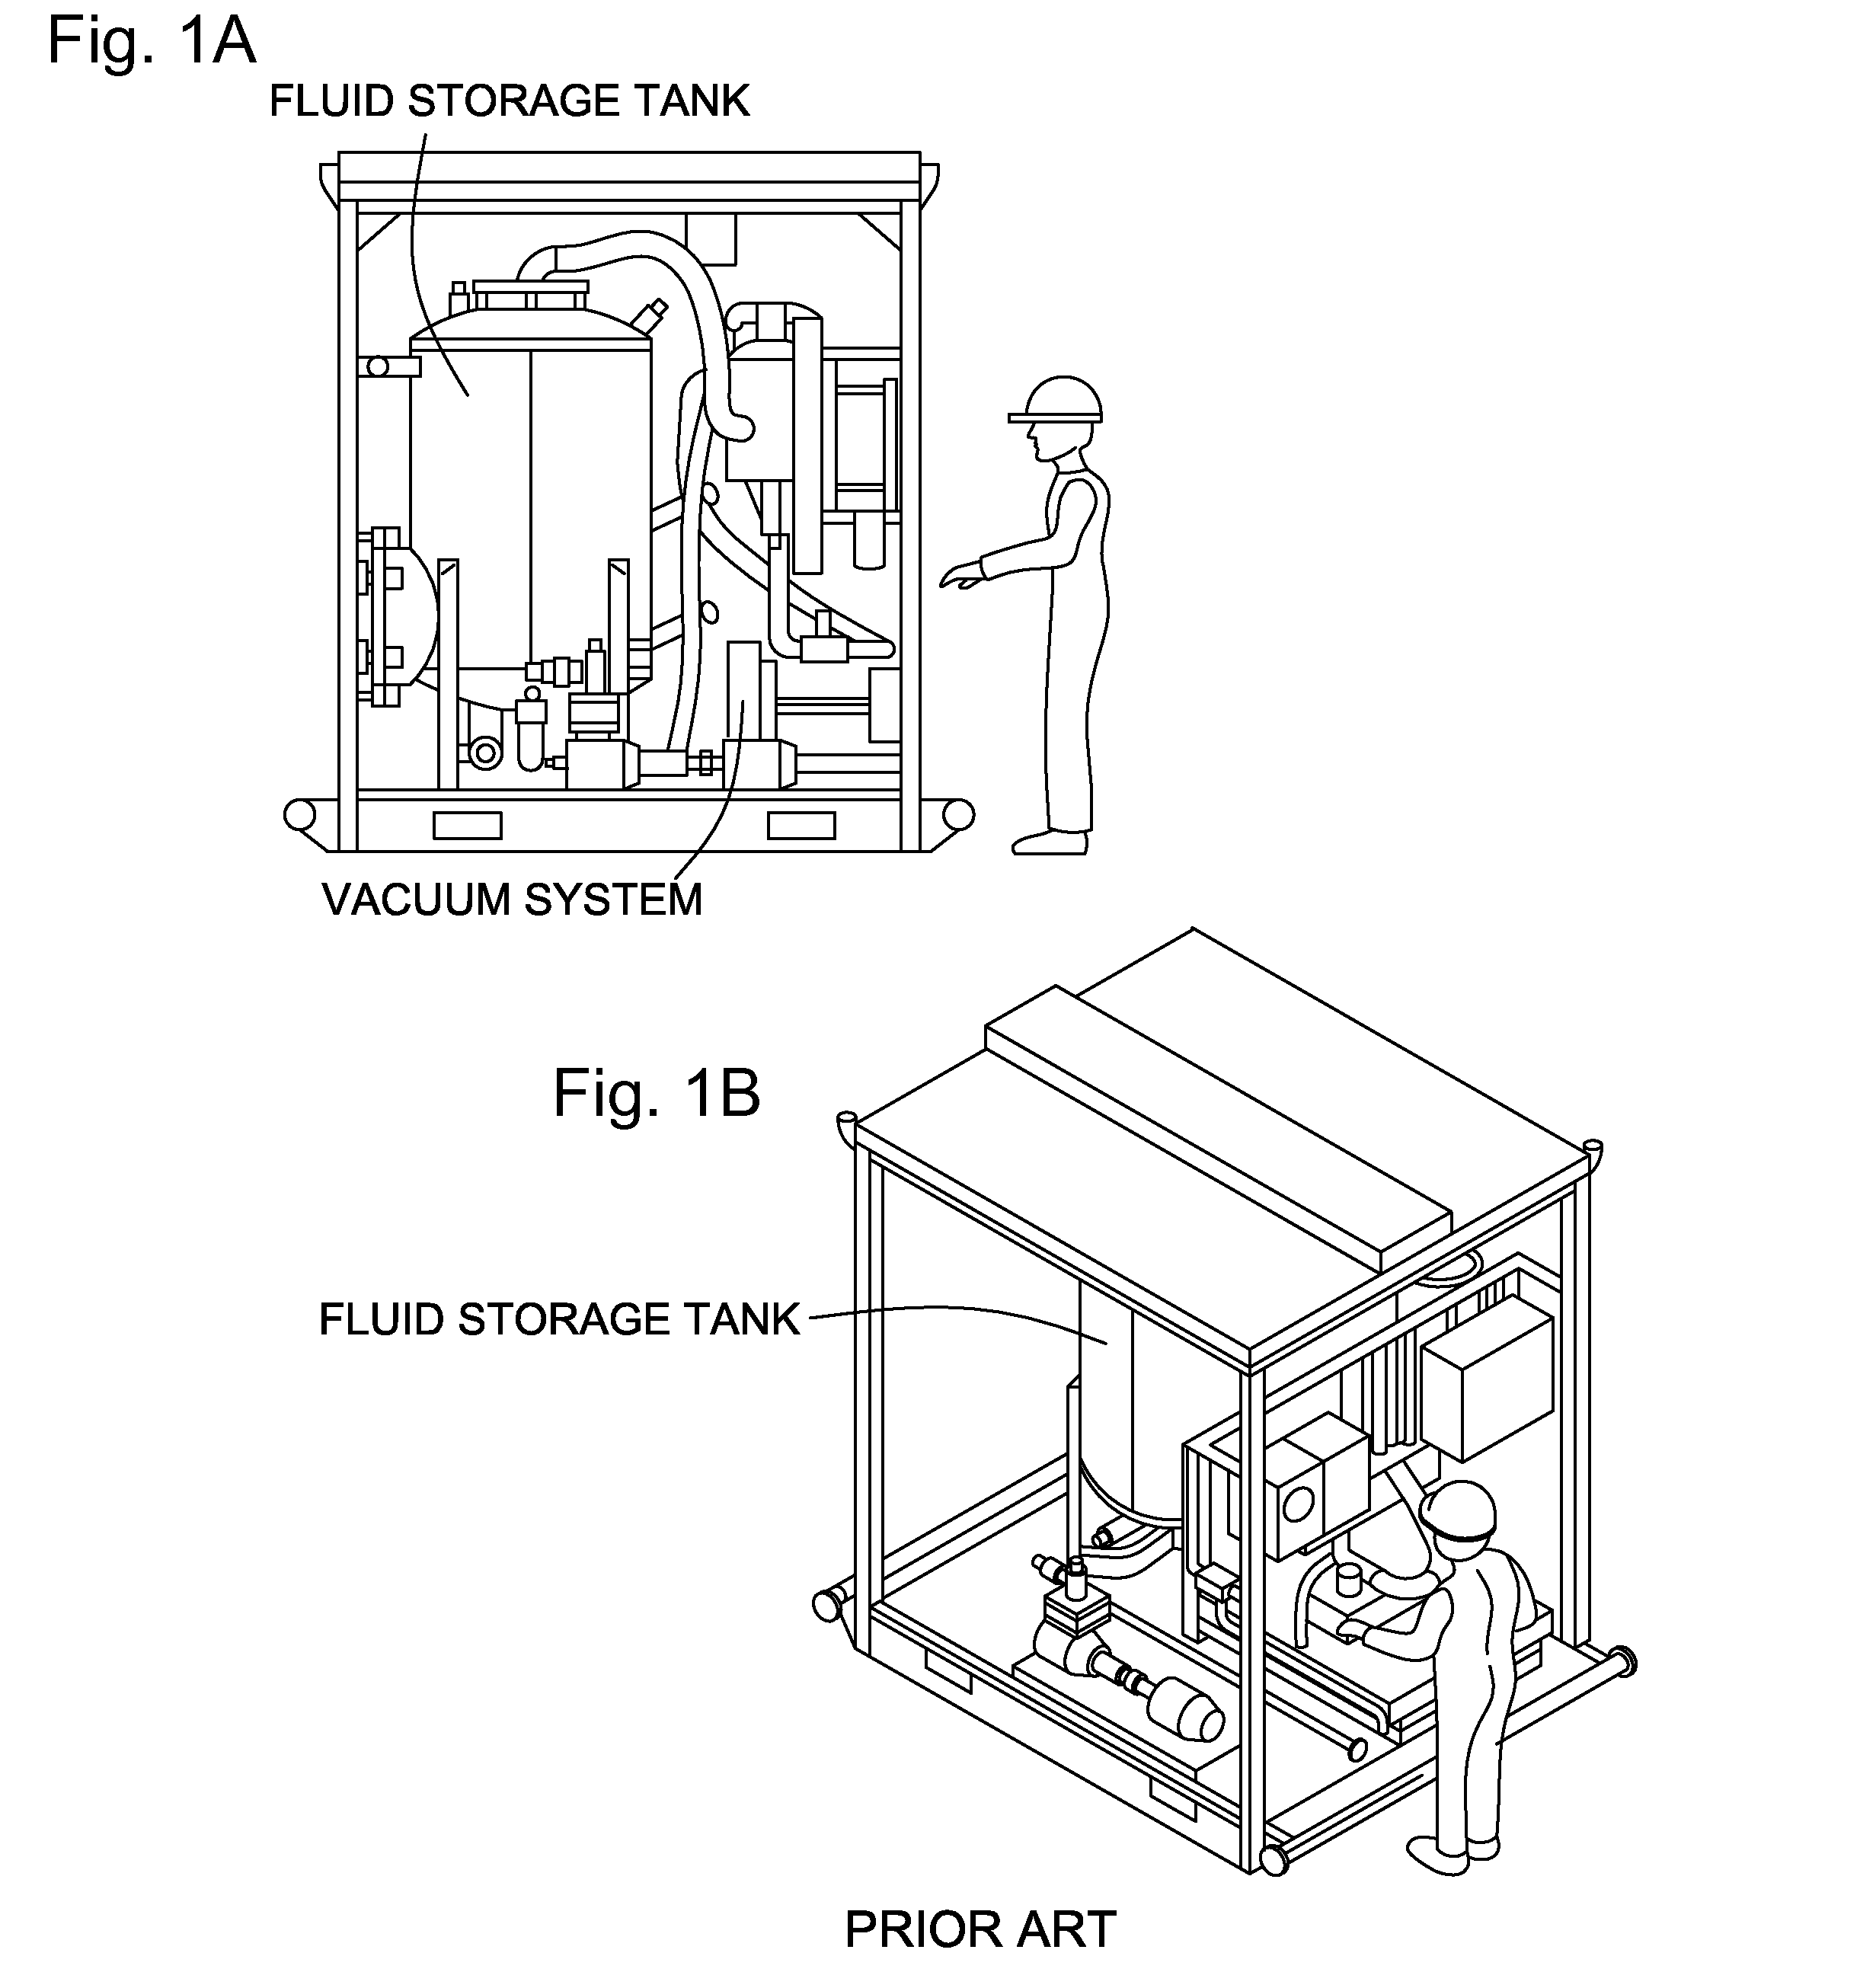 Gravity Induced Separation Of Gases And Fluids In A Vacuum-Based Drilling Fluid Recovery System